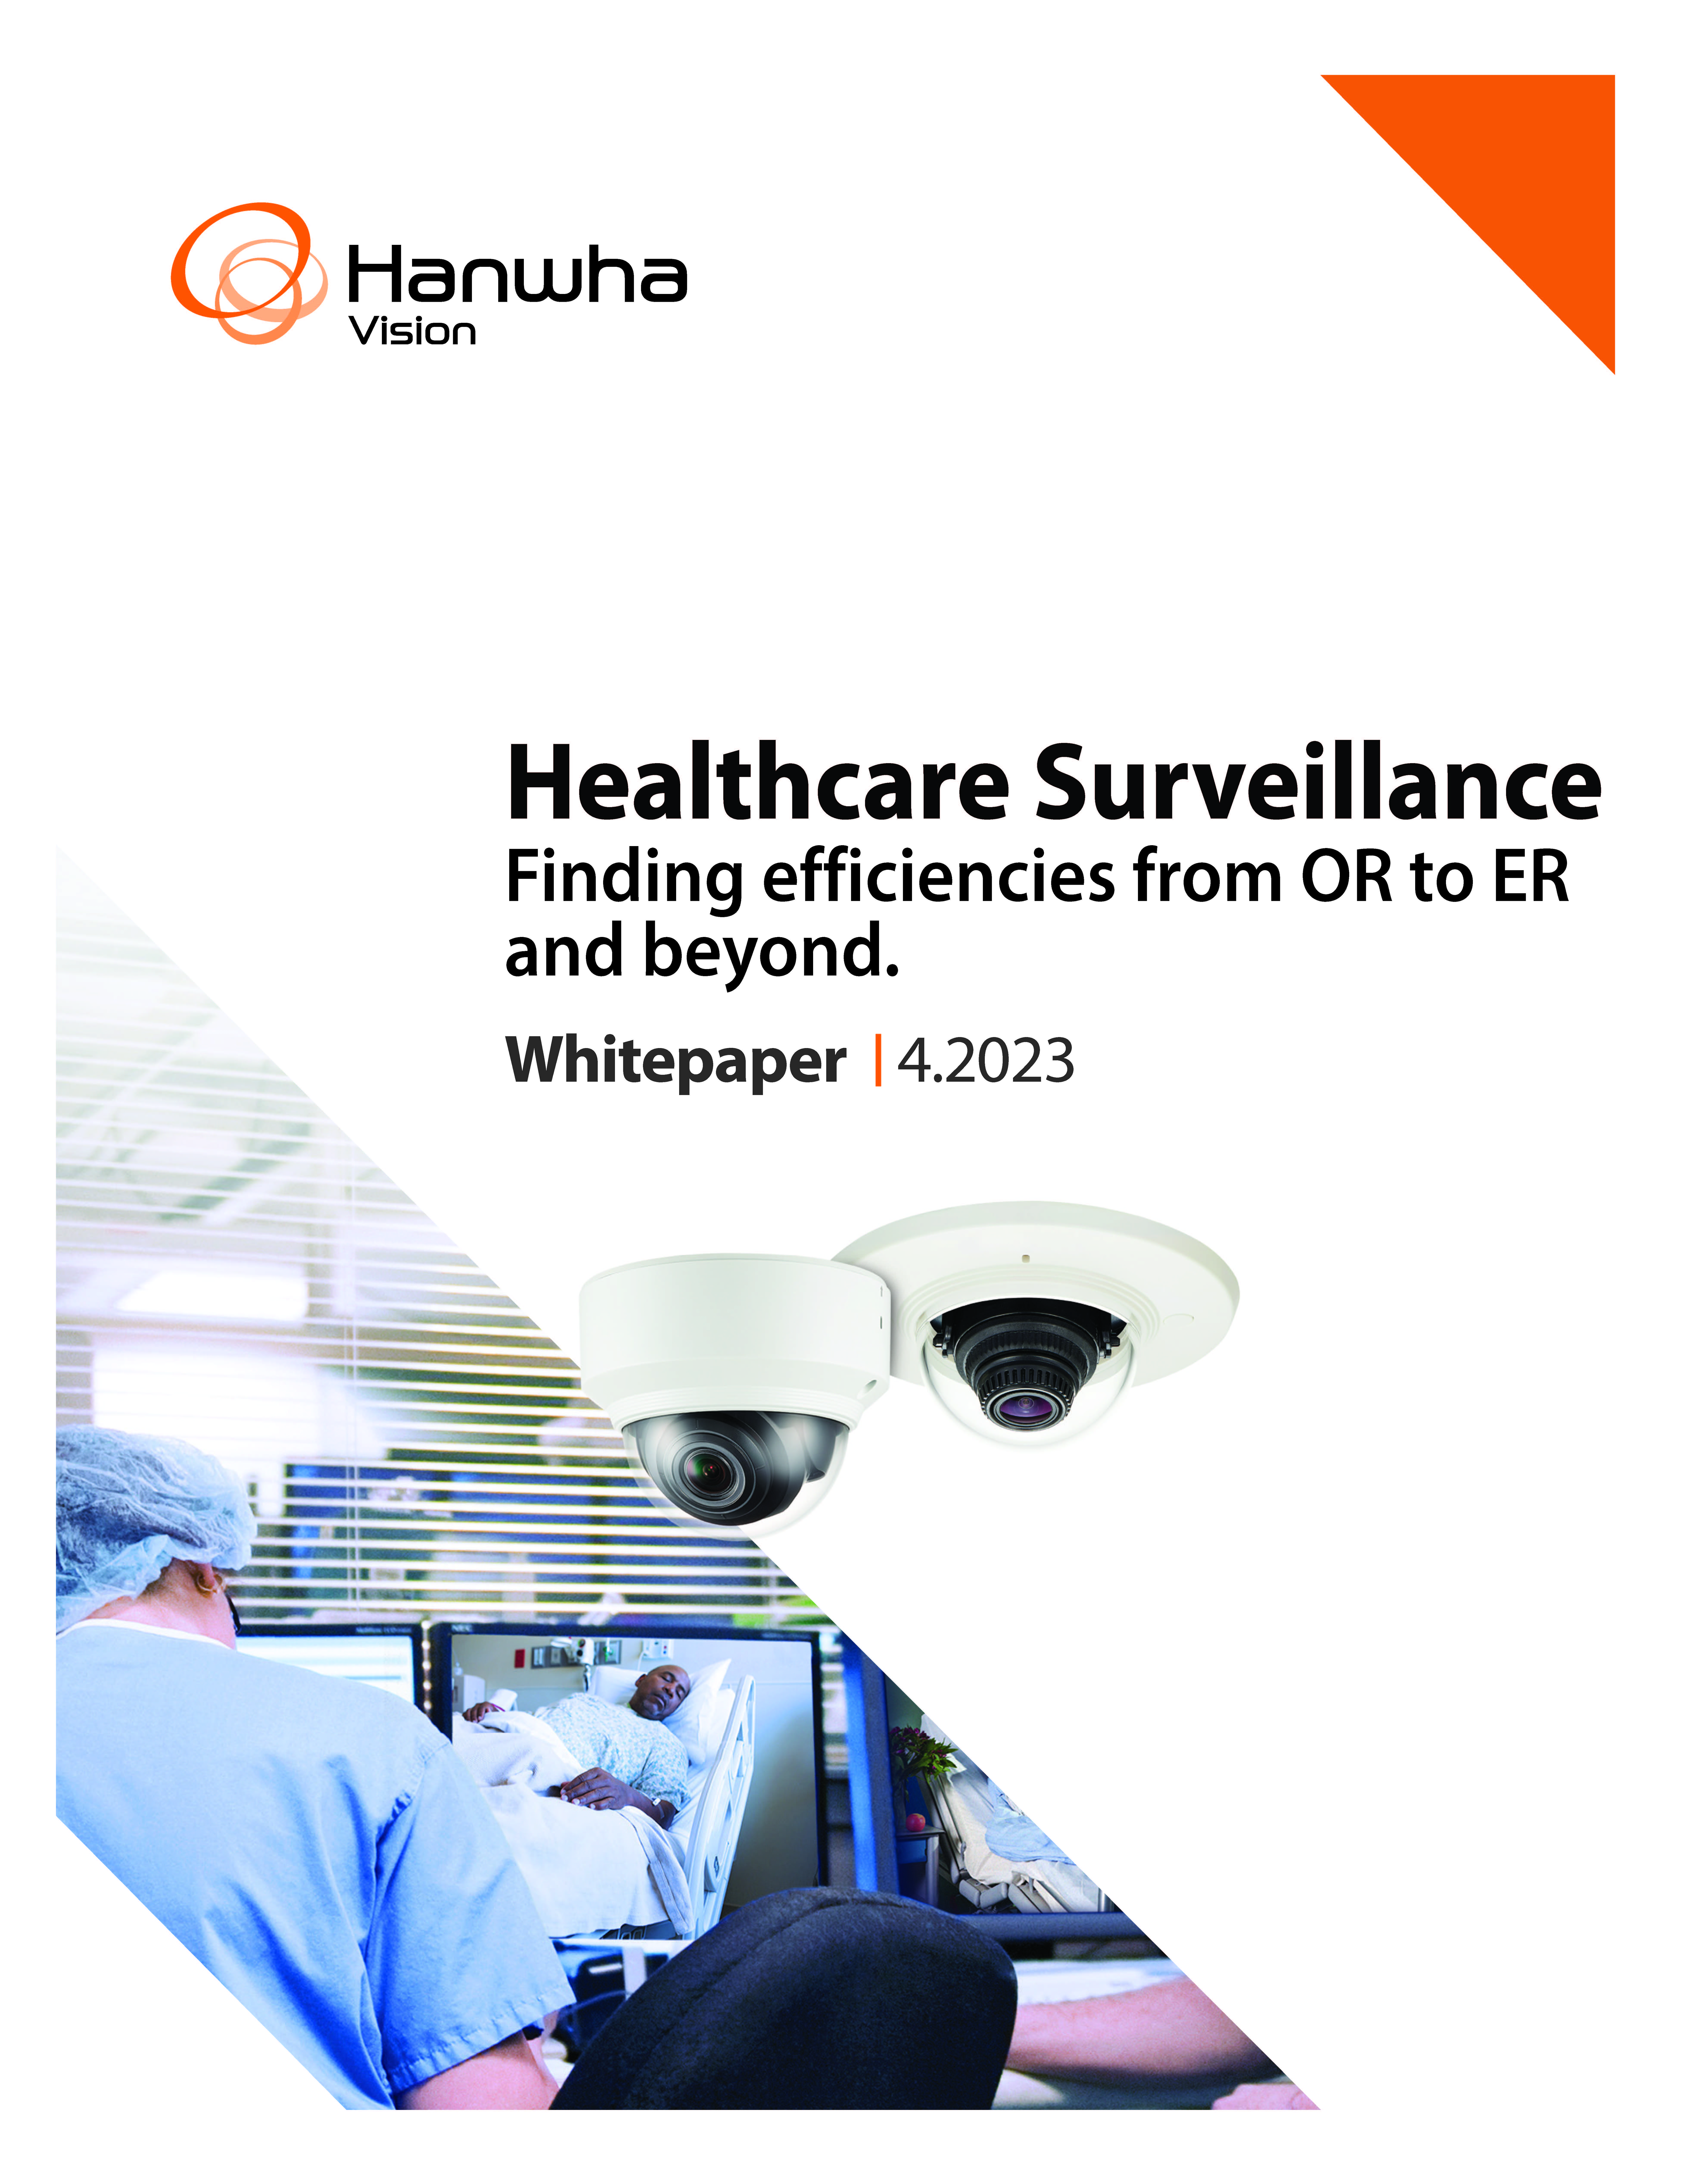 Healthcare Surveillance: Finding efficiencies from OR to ER and beyond